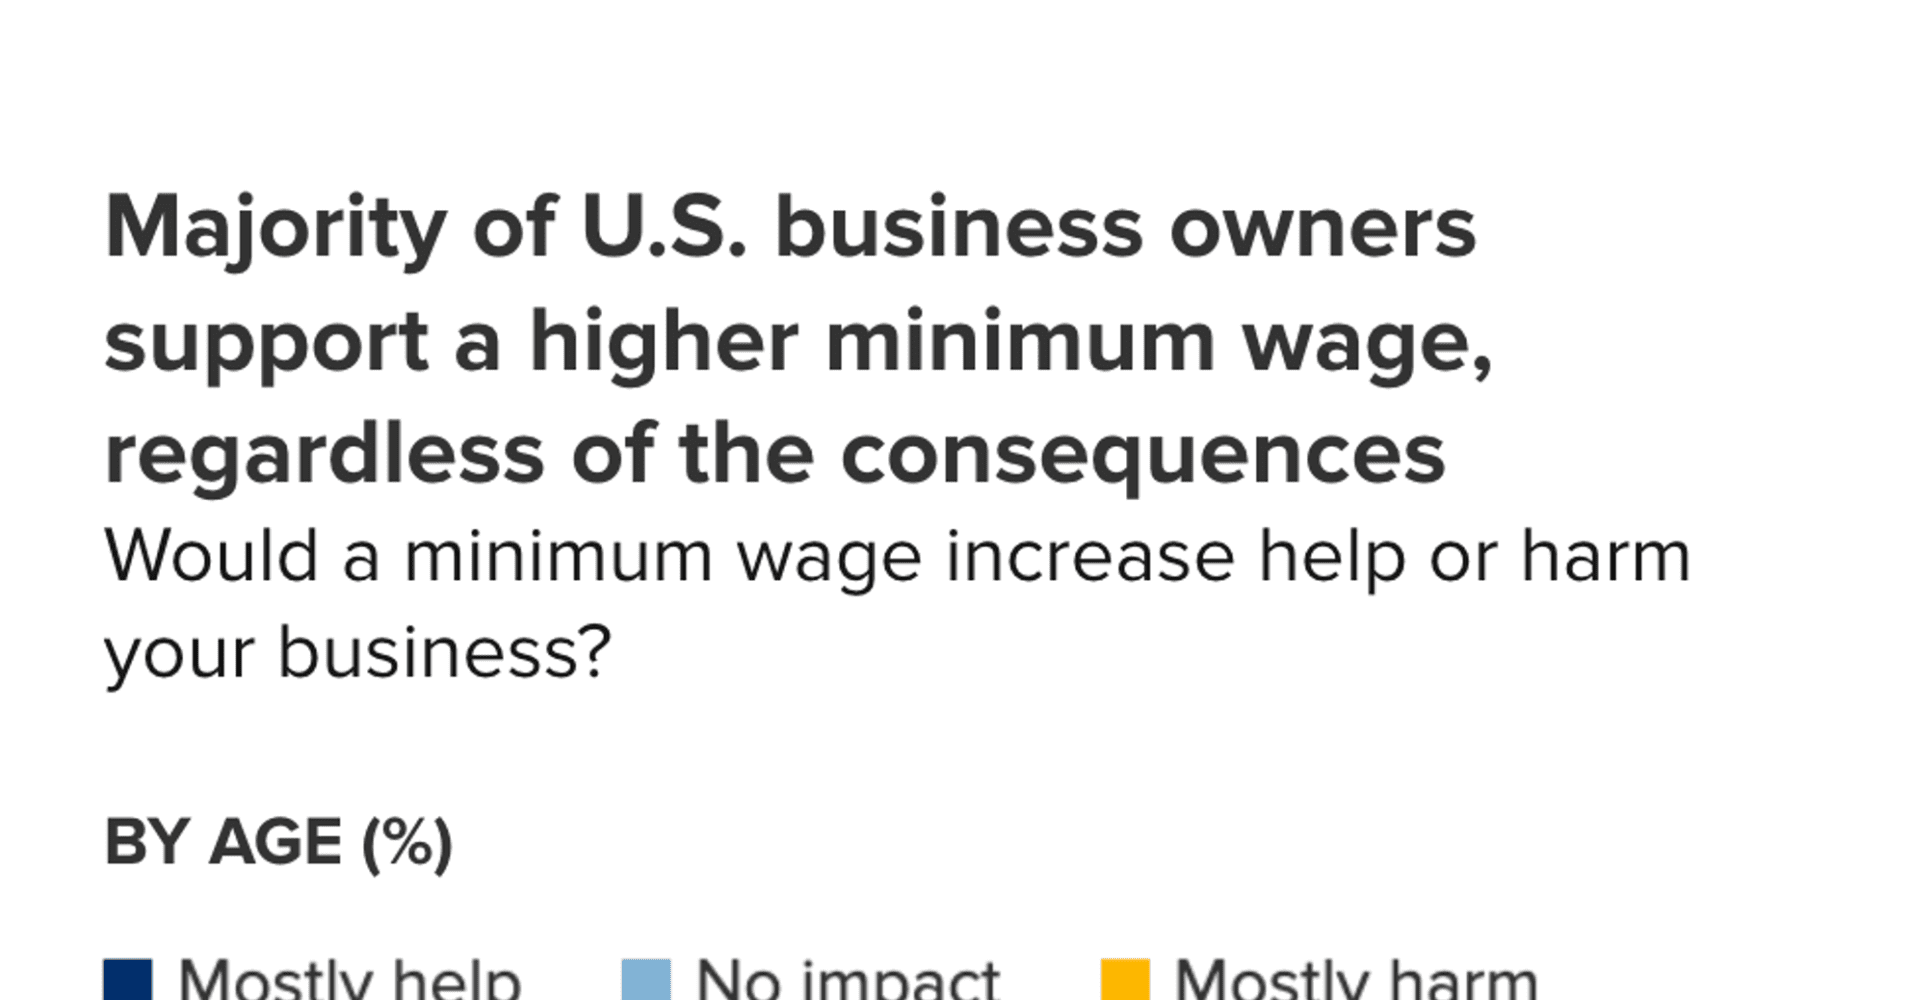 a majority of america's business owners support minimum wage increase, even as they worry about worker affordability